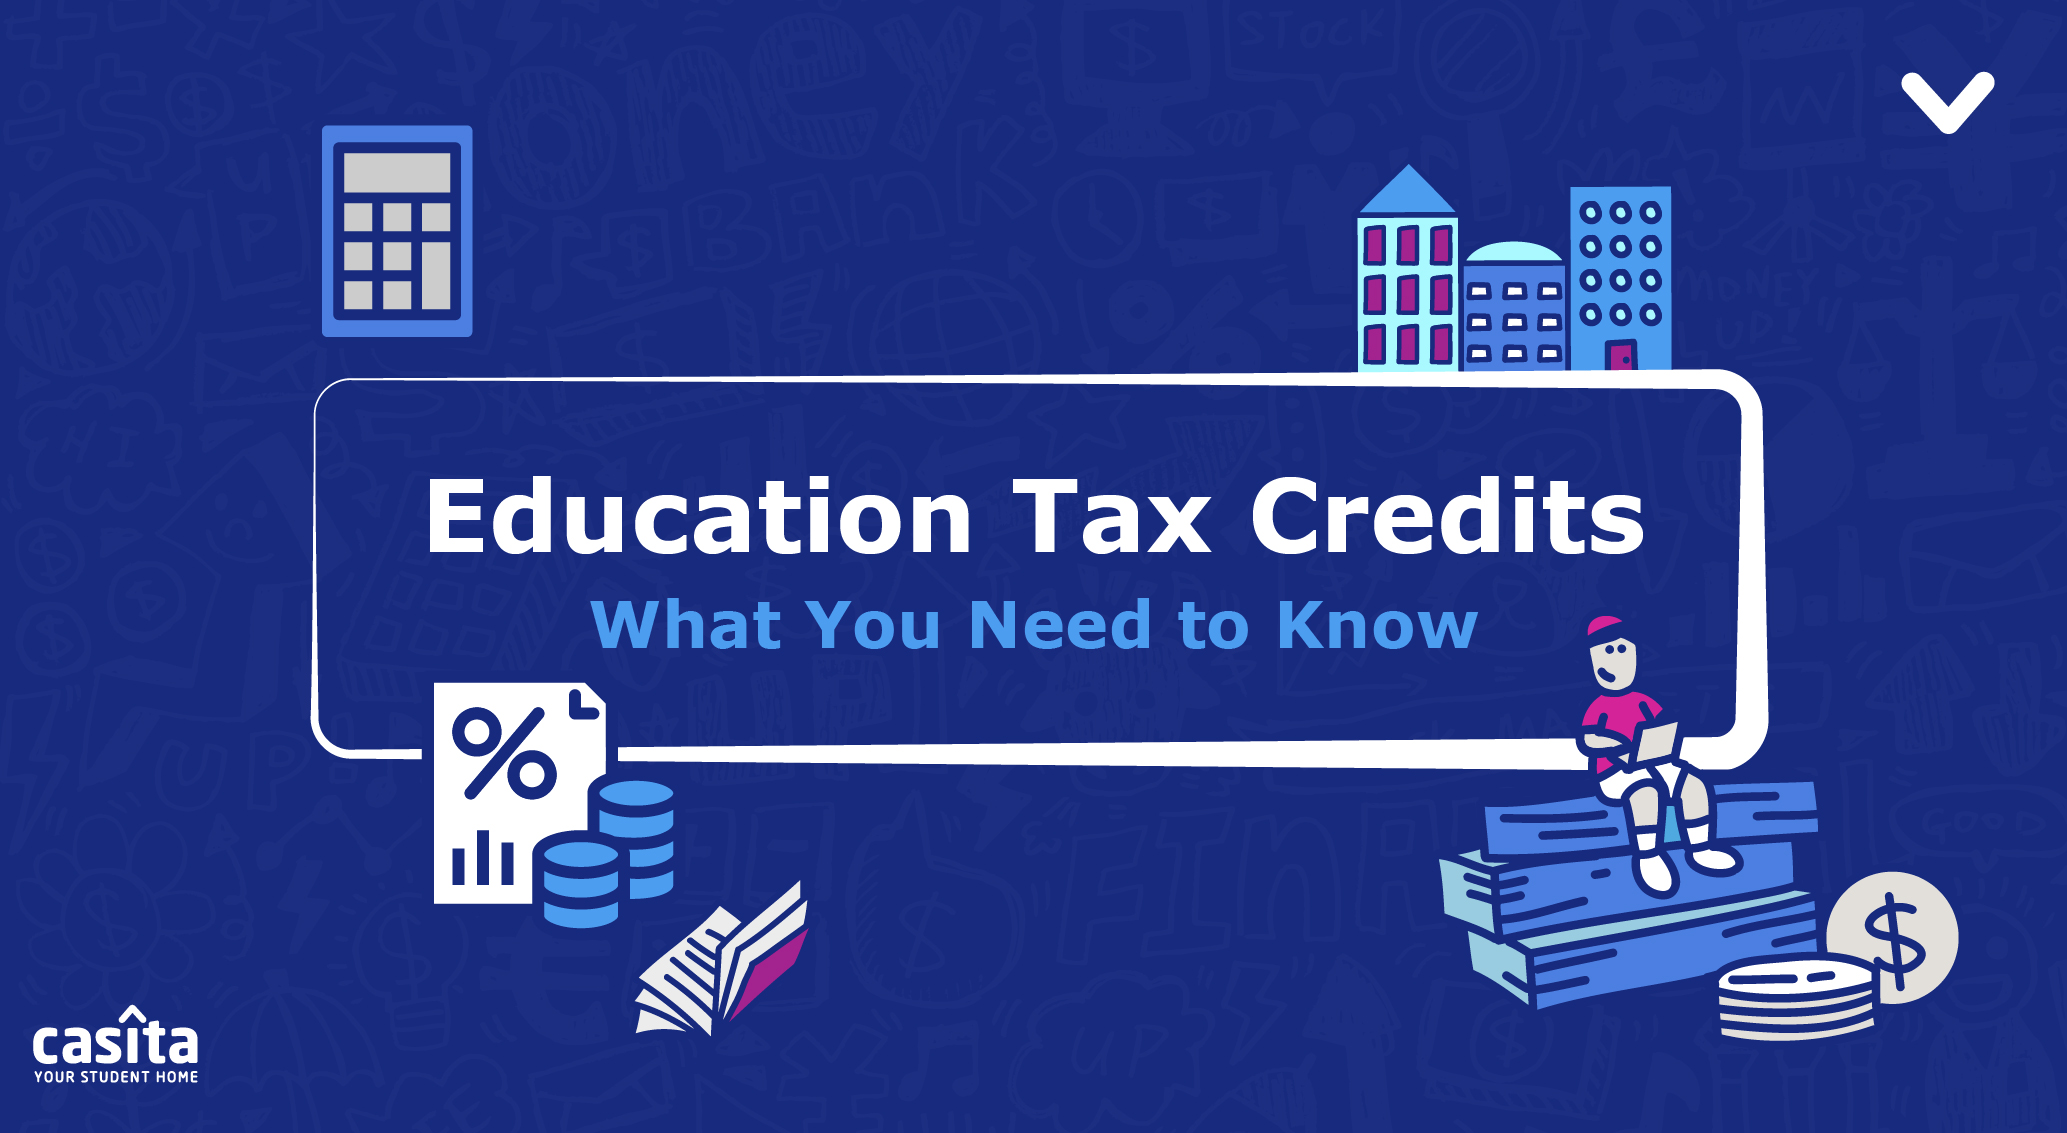 Education Tax Credits: What You Need to Know